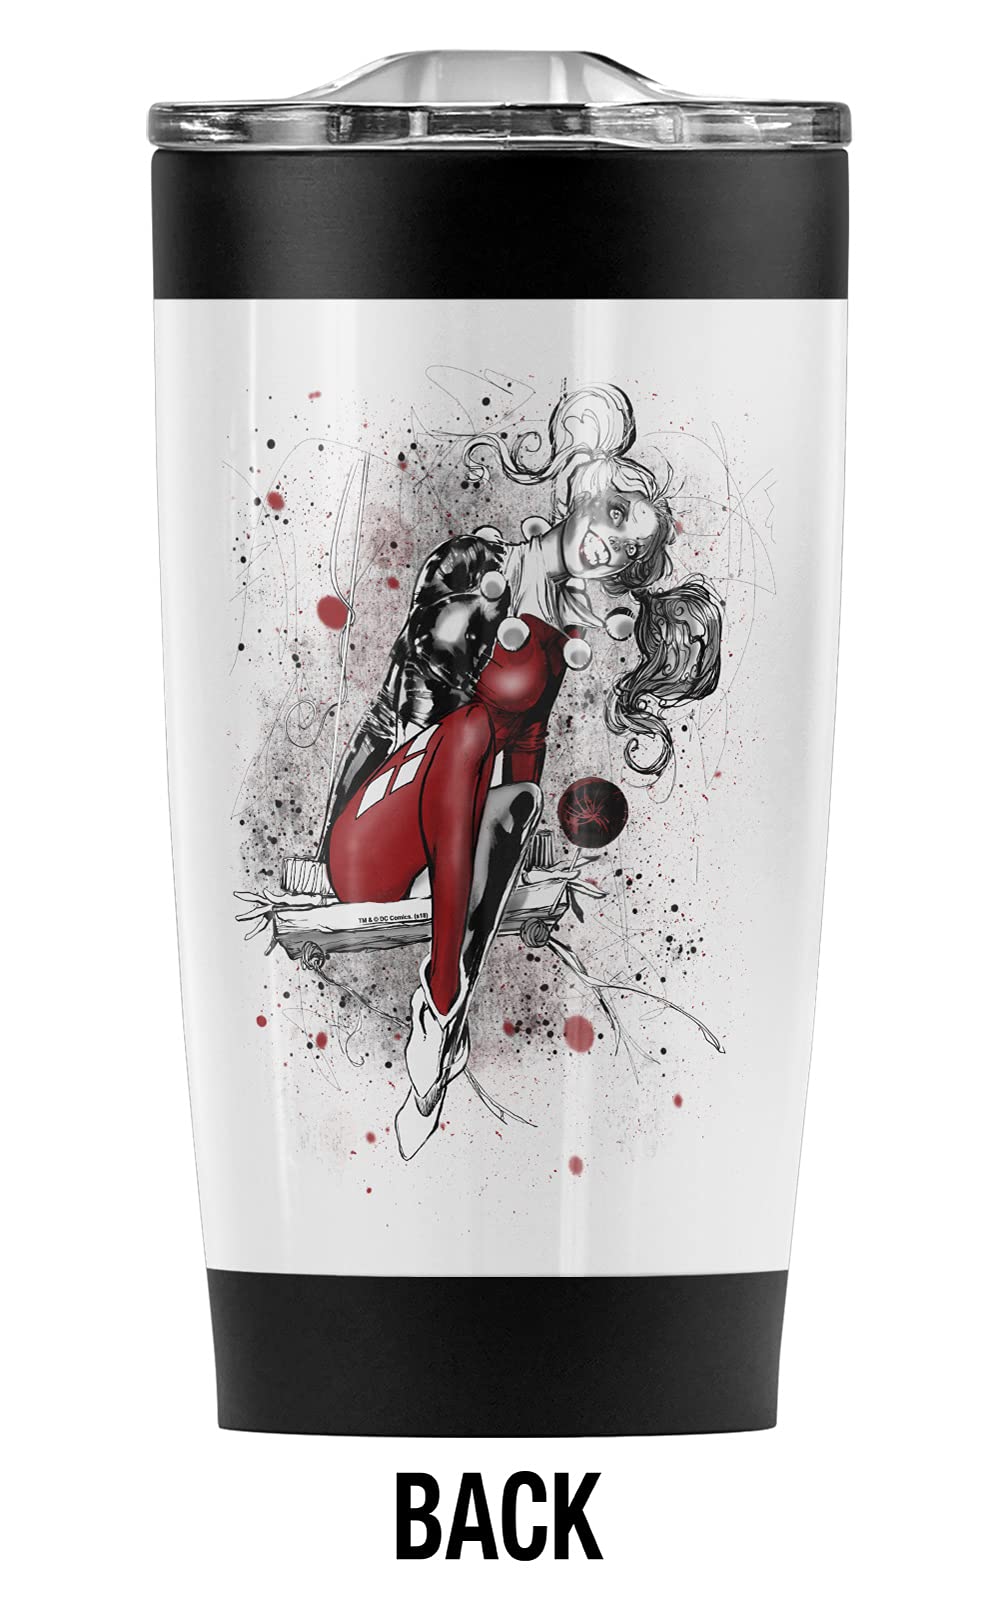 Logovision Harley Quinn Sketch Stainless Steel Tumbler 20 oz Coffee Travel Mug/Cup, Vacuum Insulated & Double Wall with Leakproof Sliding Lid | Great for Hot Drinks and Cold Beverages